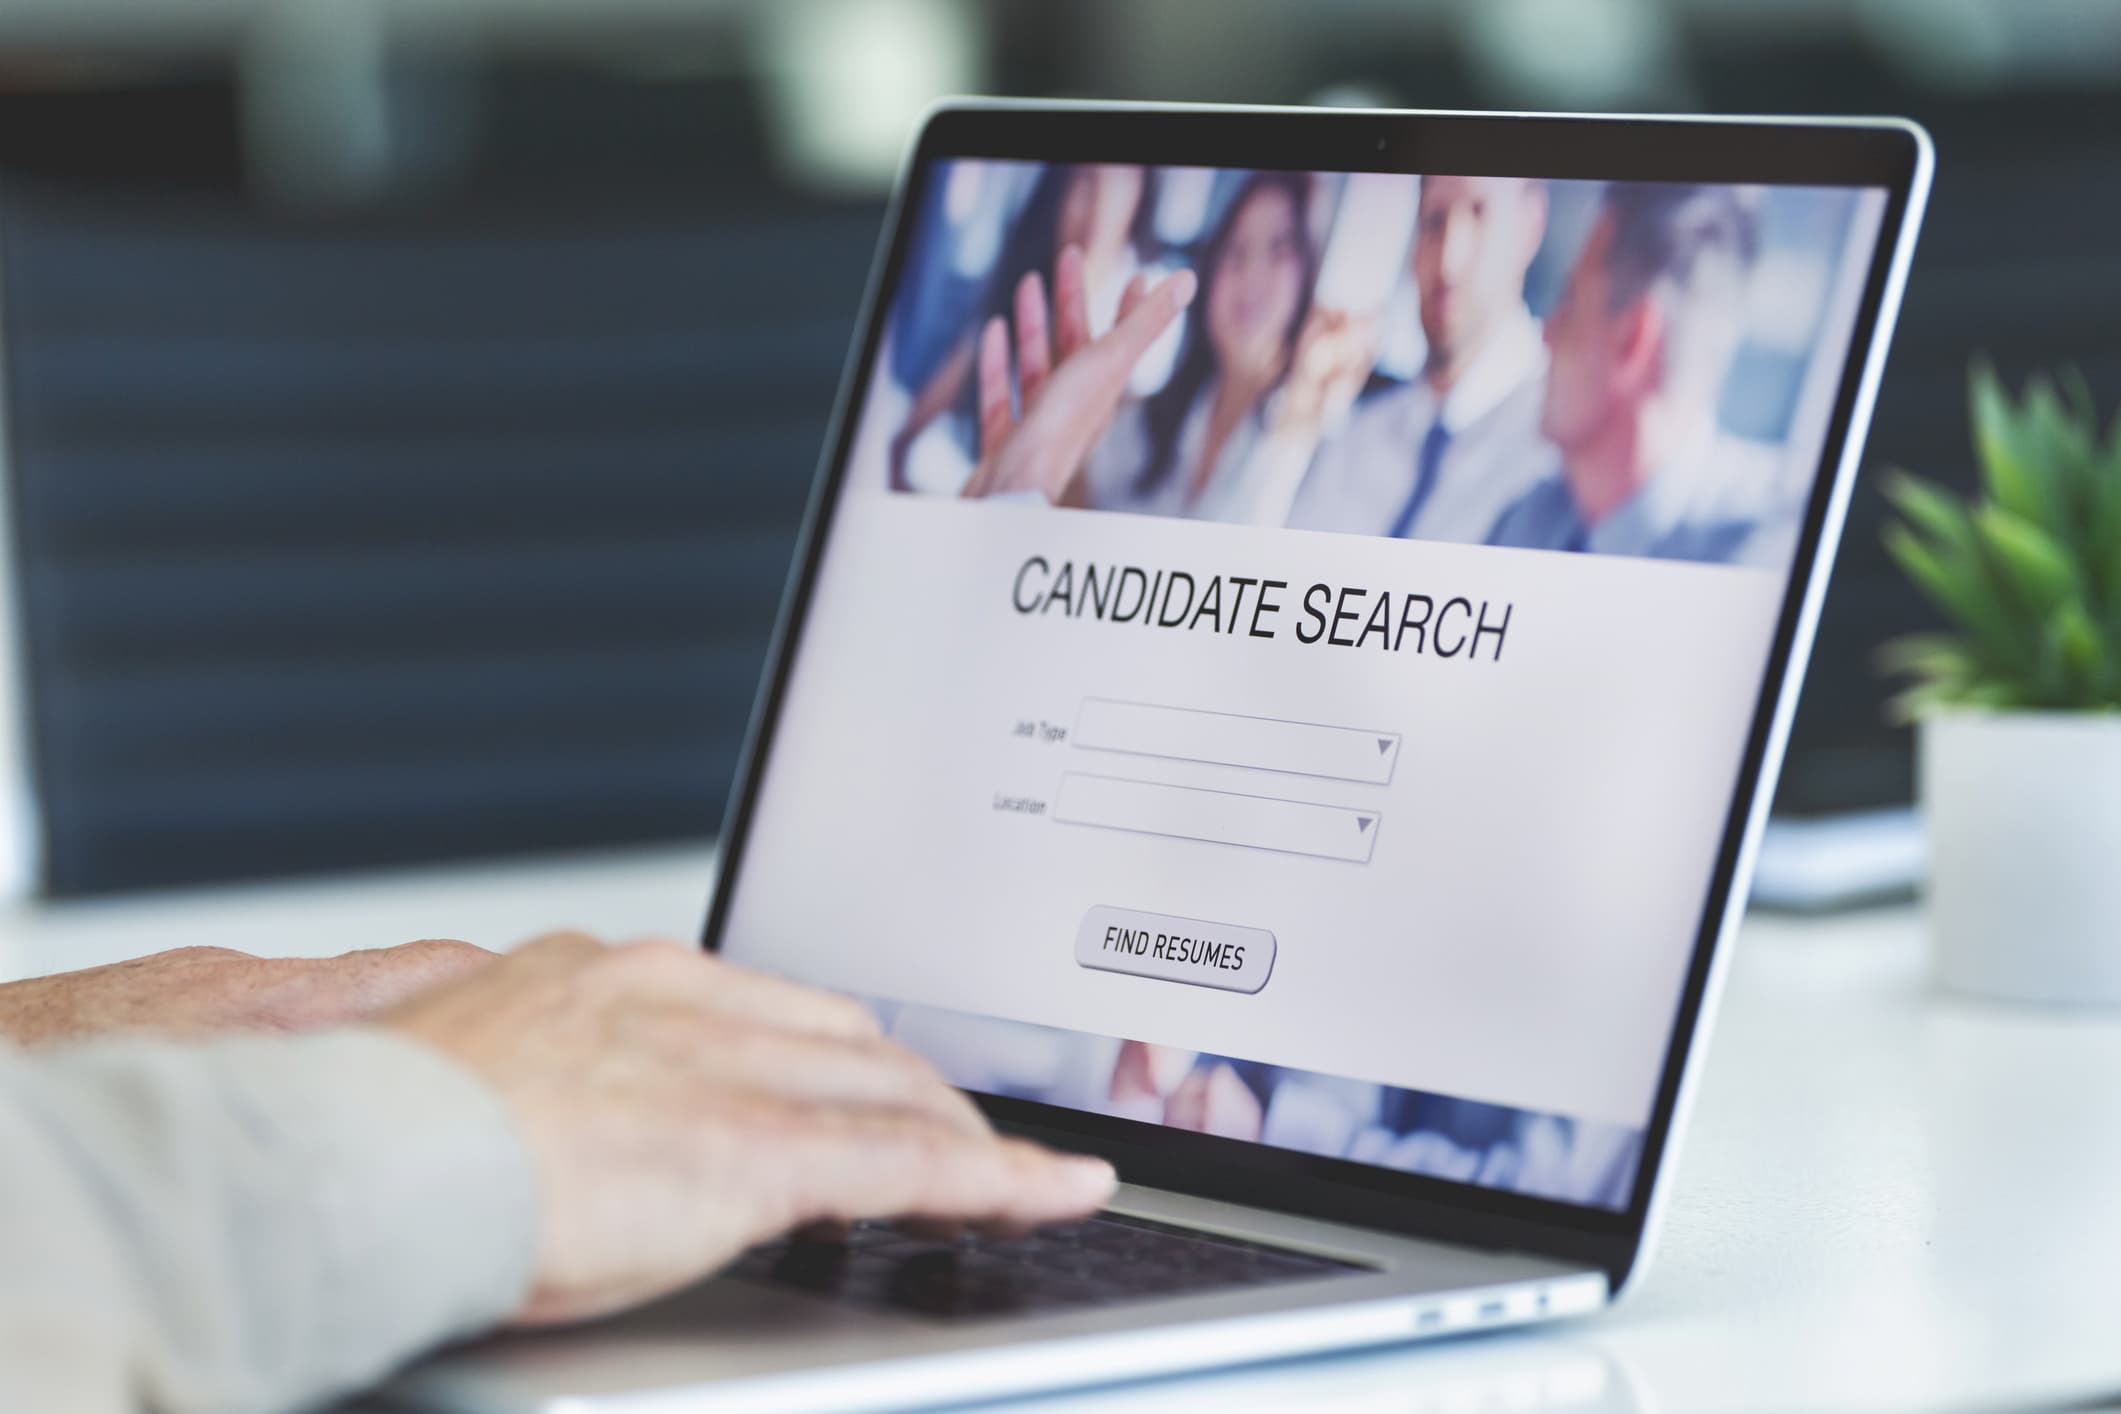 Template: How to Recruit Passive Job Candidates